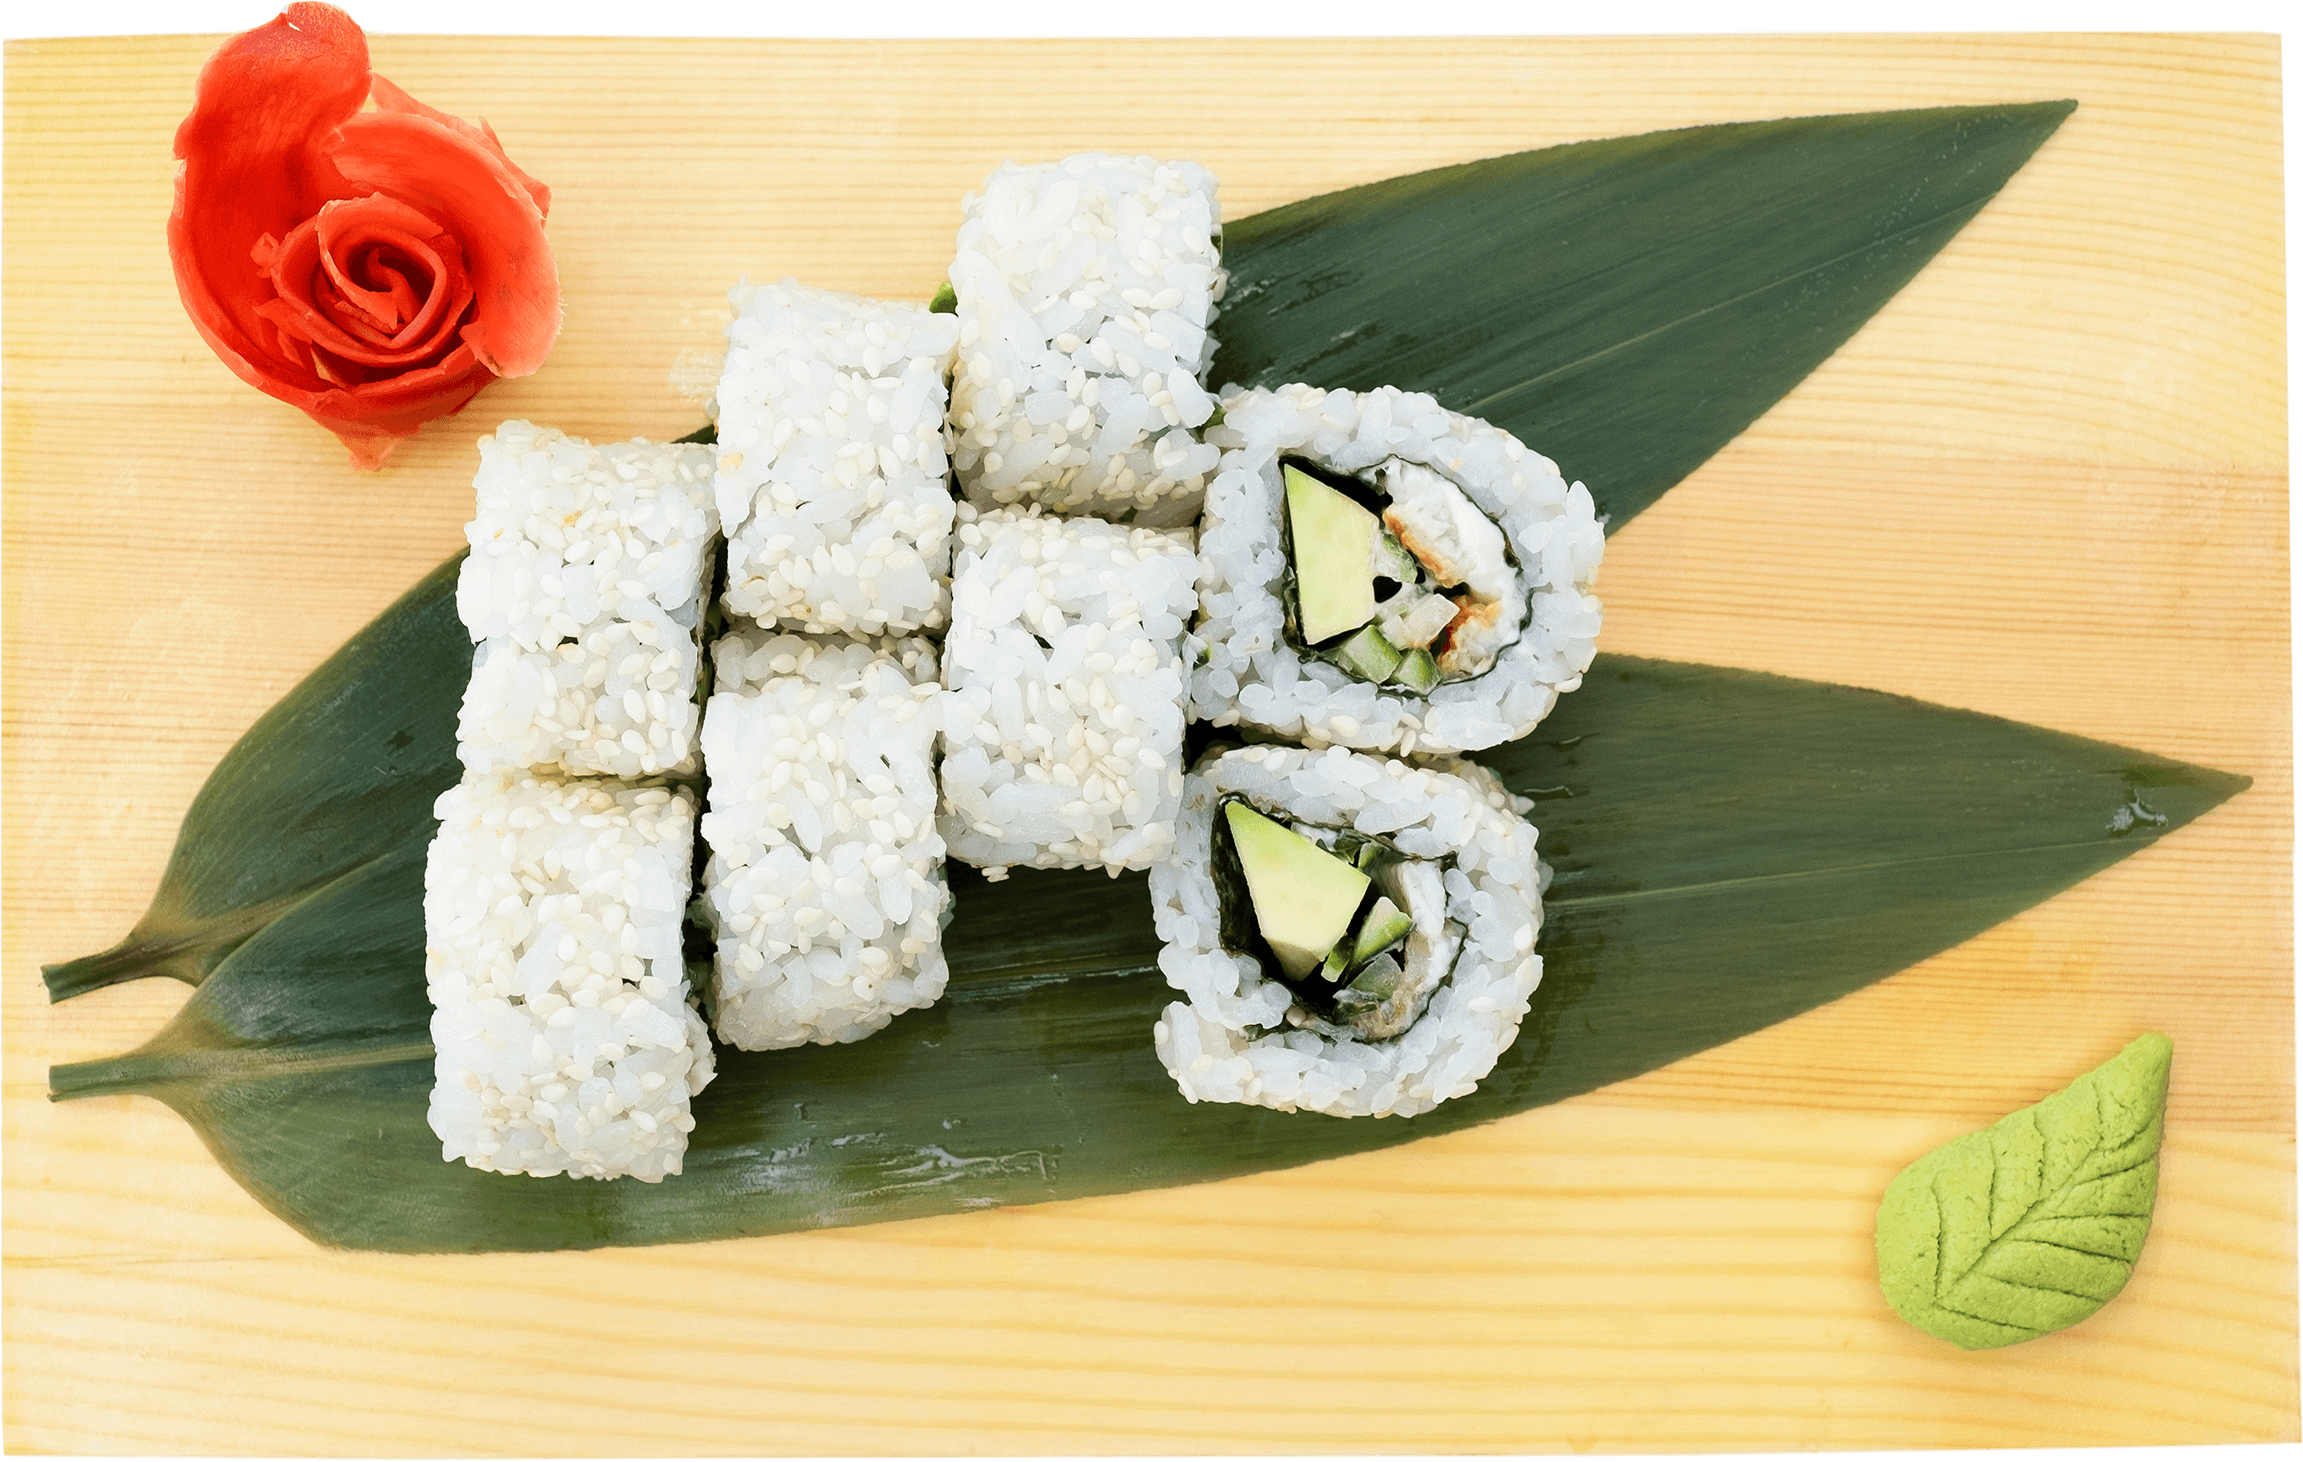  California roll recipe with smoked eel in sesame